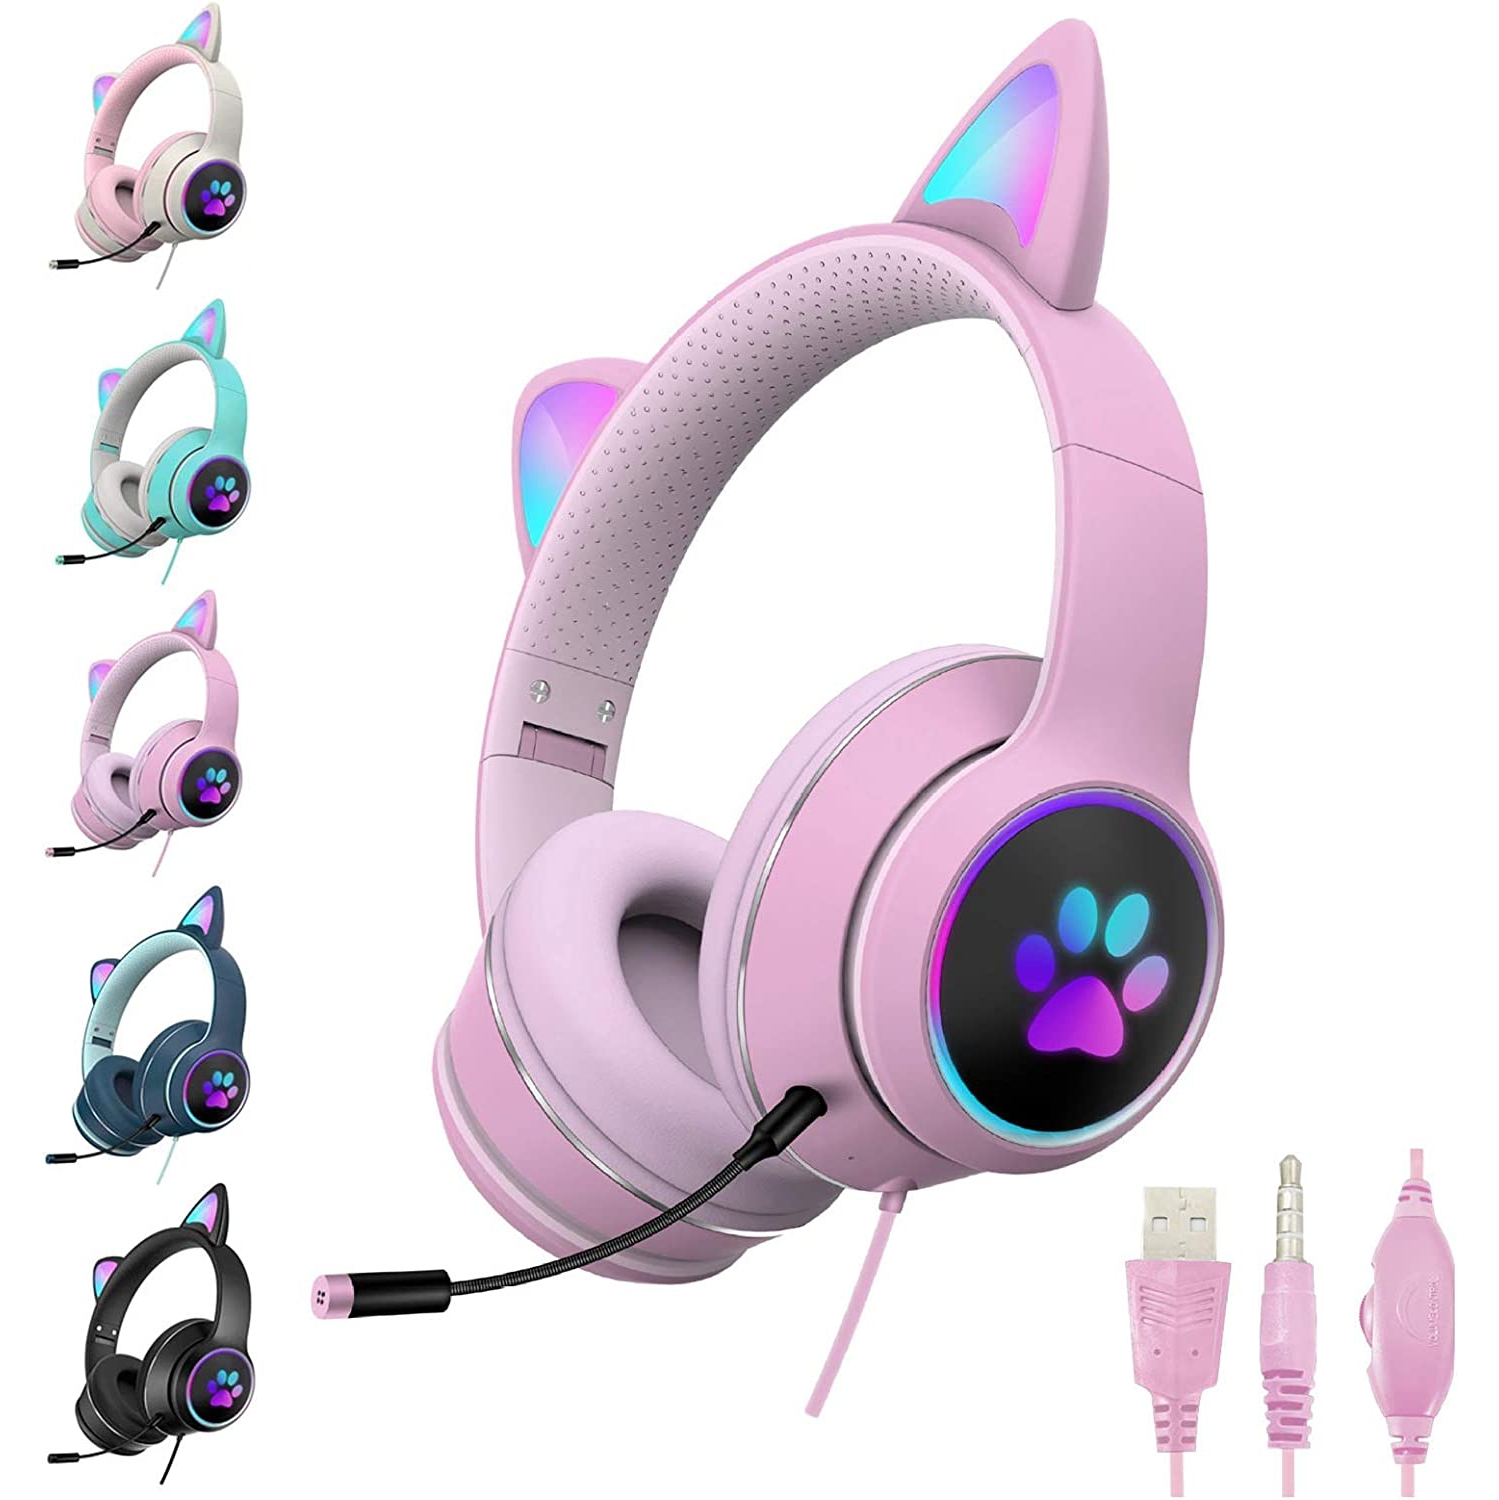 Dolaer Cat Ear Wired Headphones with Mic, Headset with Noise Canceling Microphone